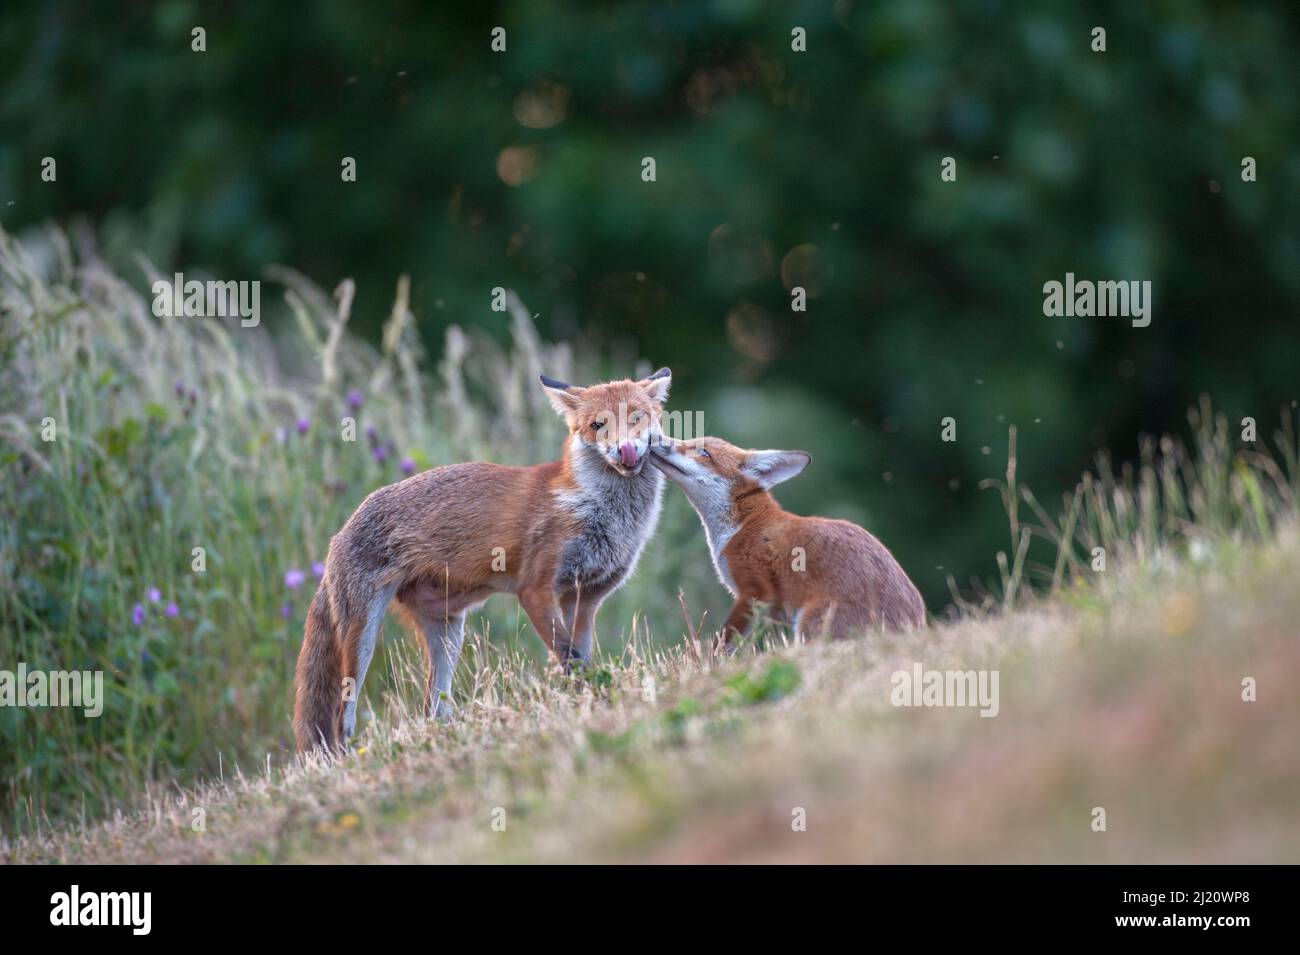 Red fox (Vulpes vulpes) cub in pasture asking vixen for food, England. Stock Photo